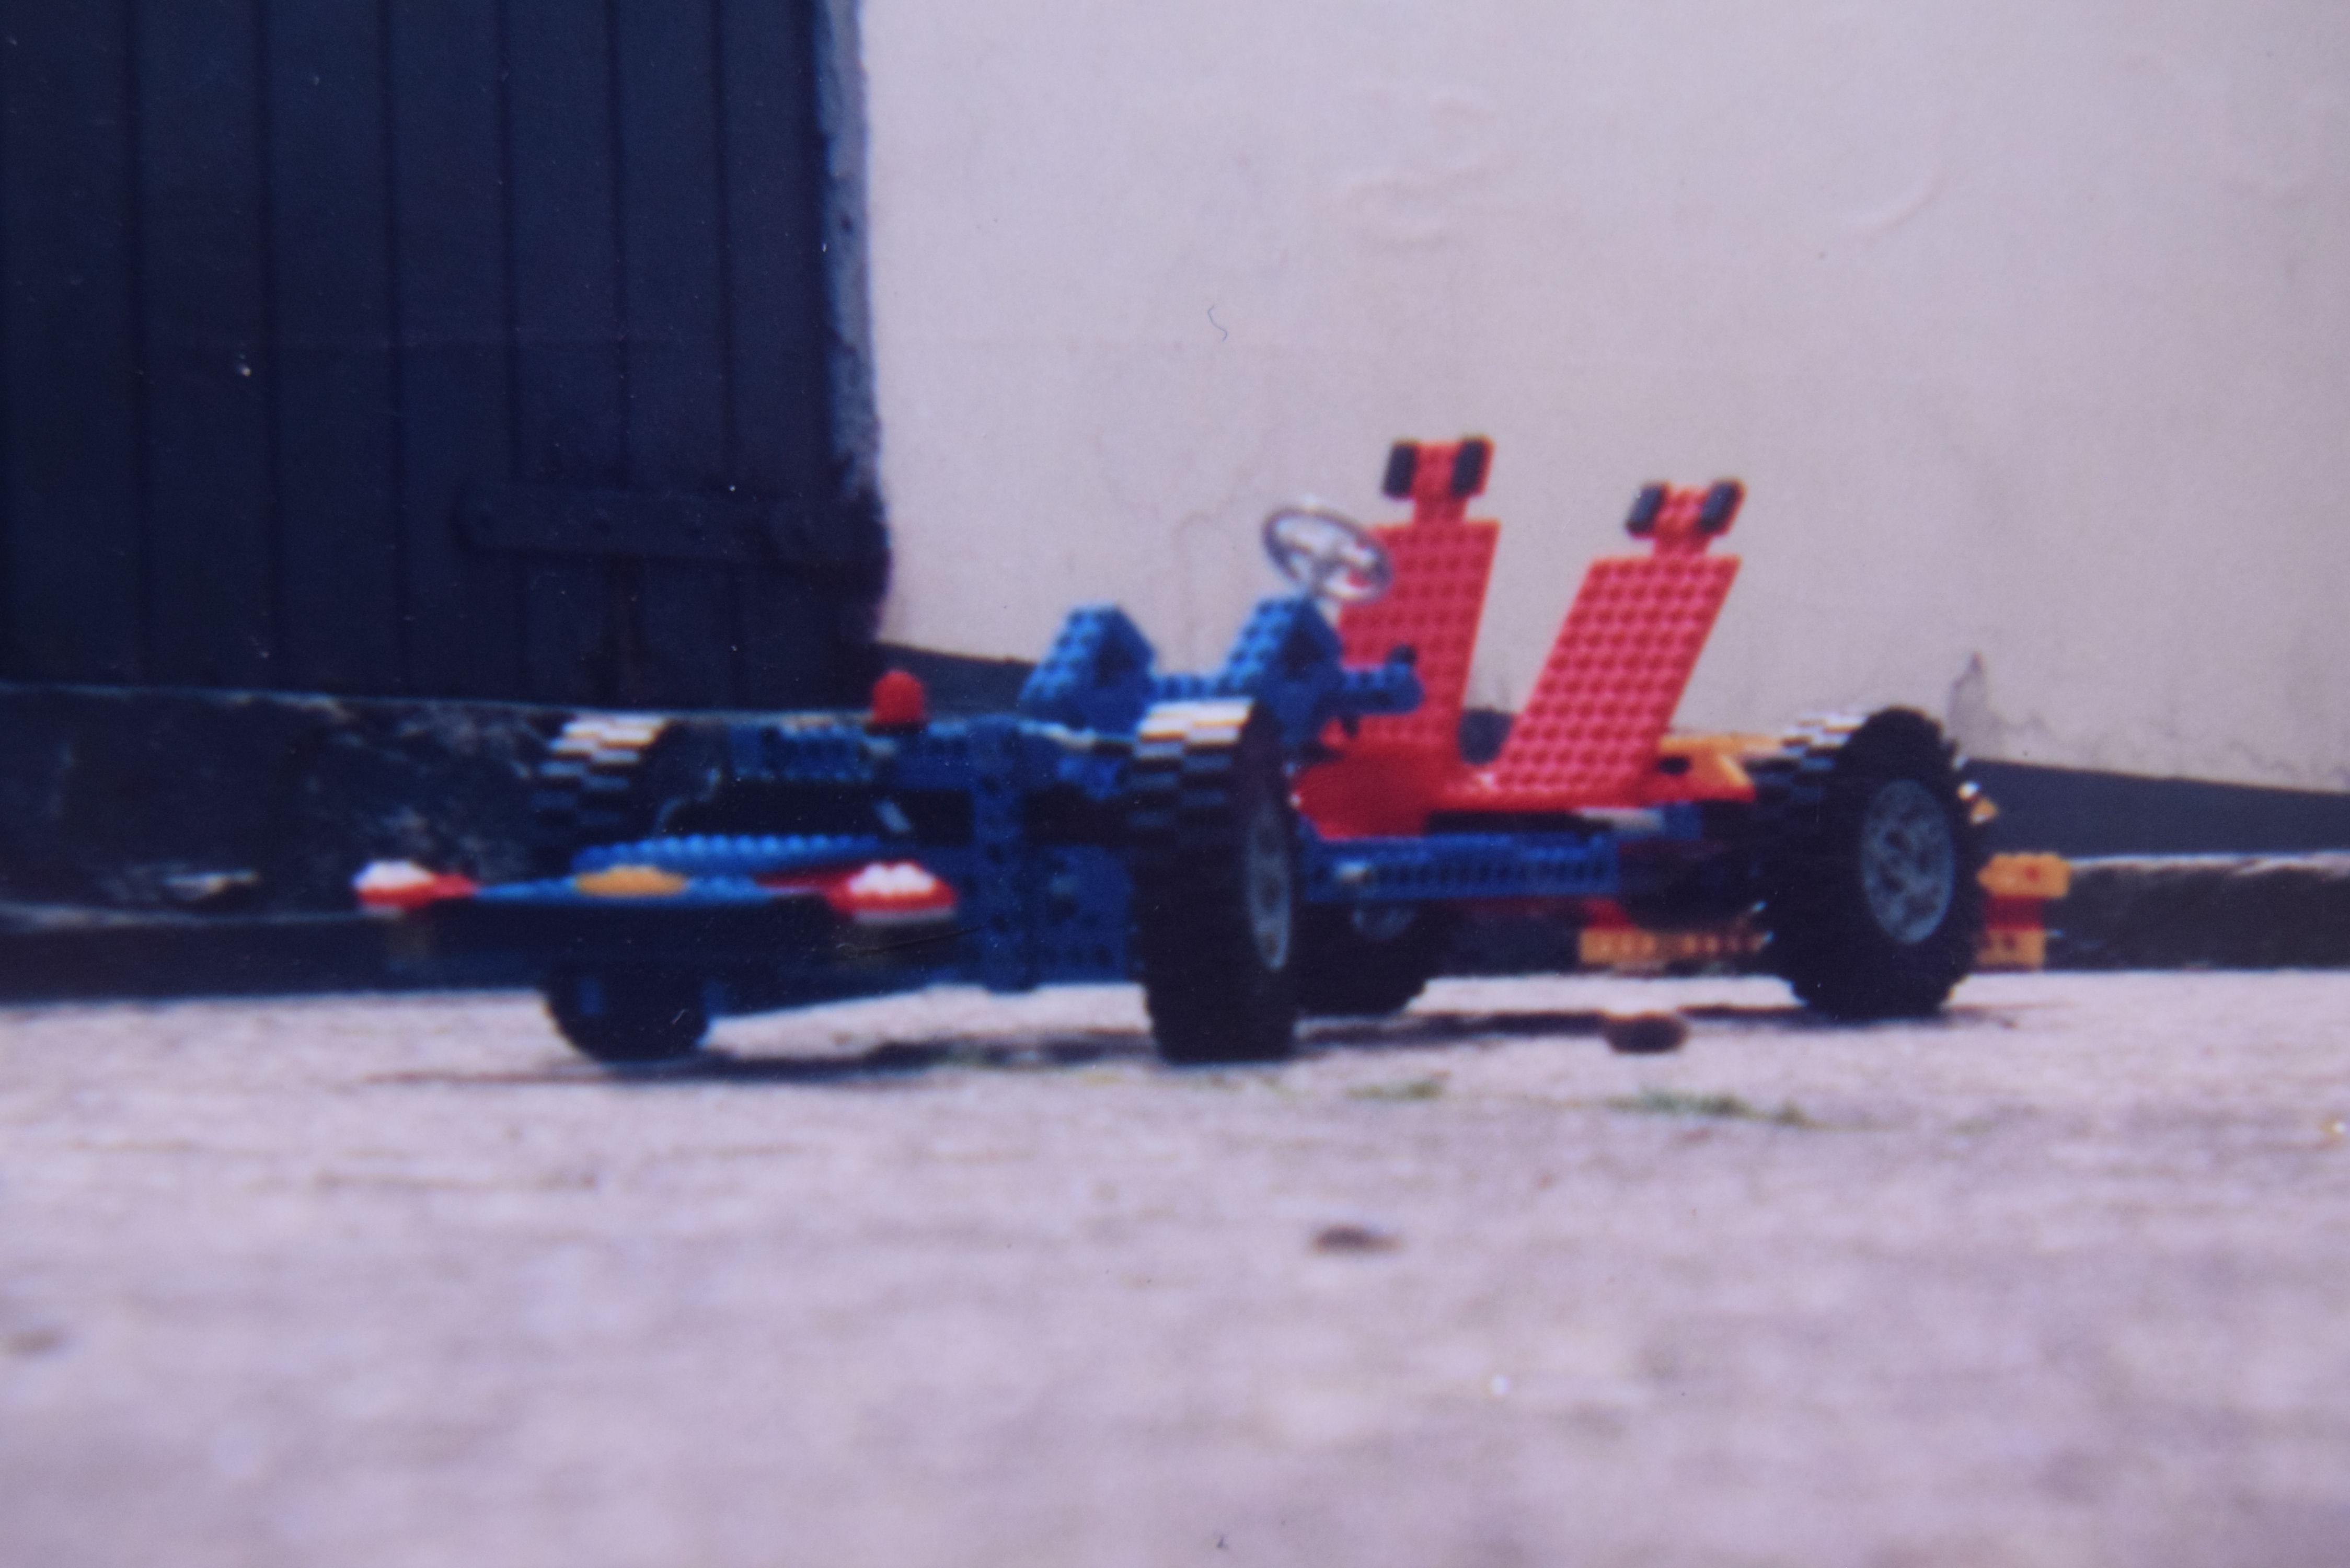 002_car_chassis.jpg